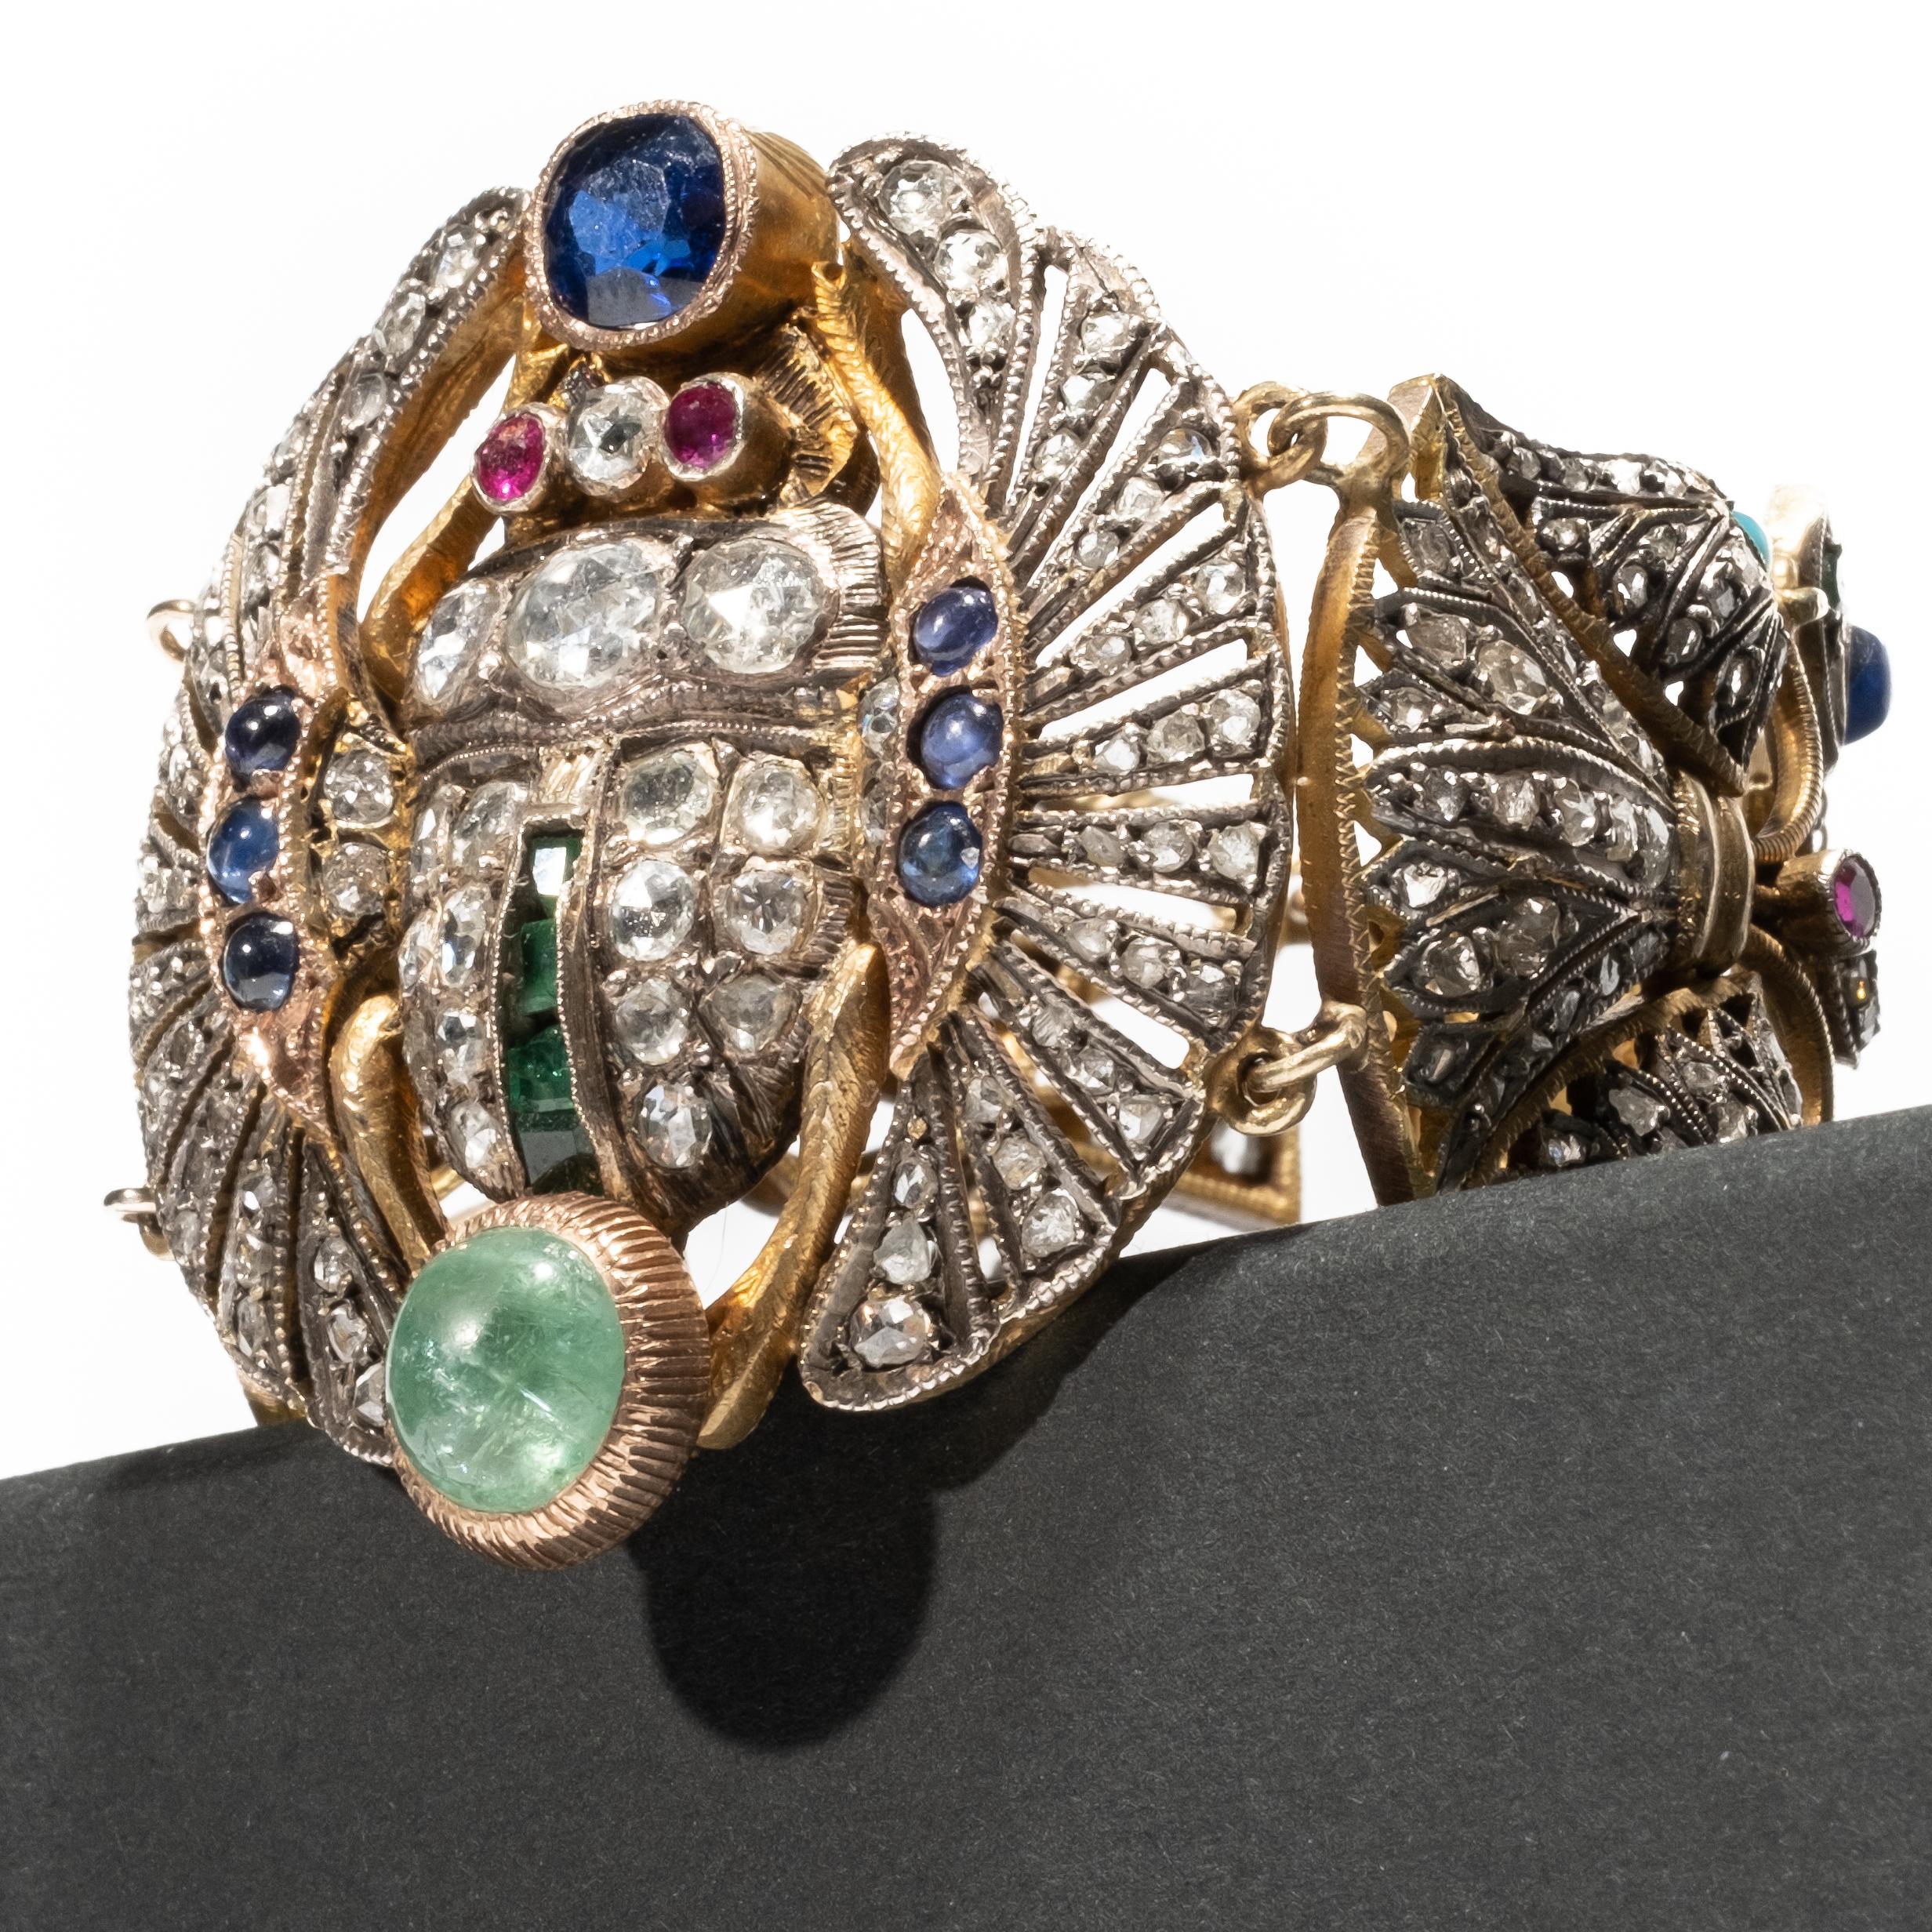 Early 20th Century Egyptian revival Silver and gold Diamond and gem-set scarab bracelet. Centered on a scarab, set with rose-cut diamonds, rubies, emeralds, and sapphires, joining ankh and lotus links set with diamonds, sapphires, turquoise, and